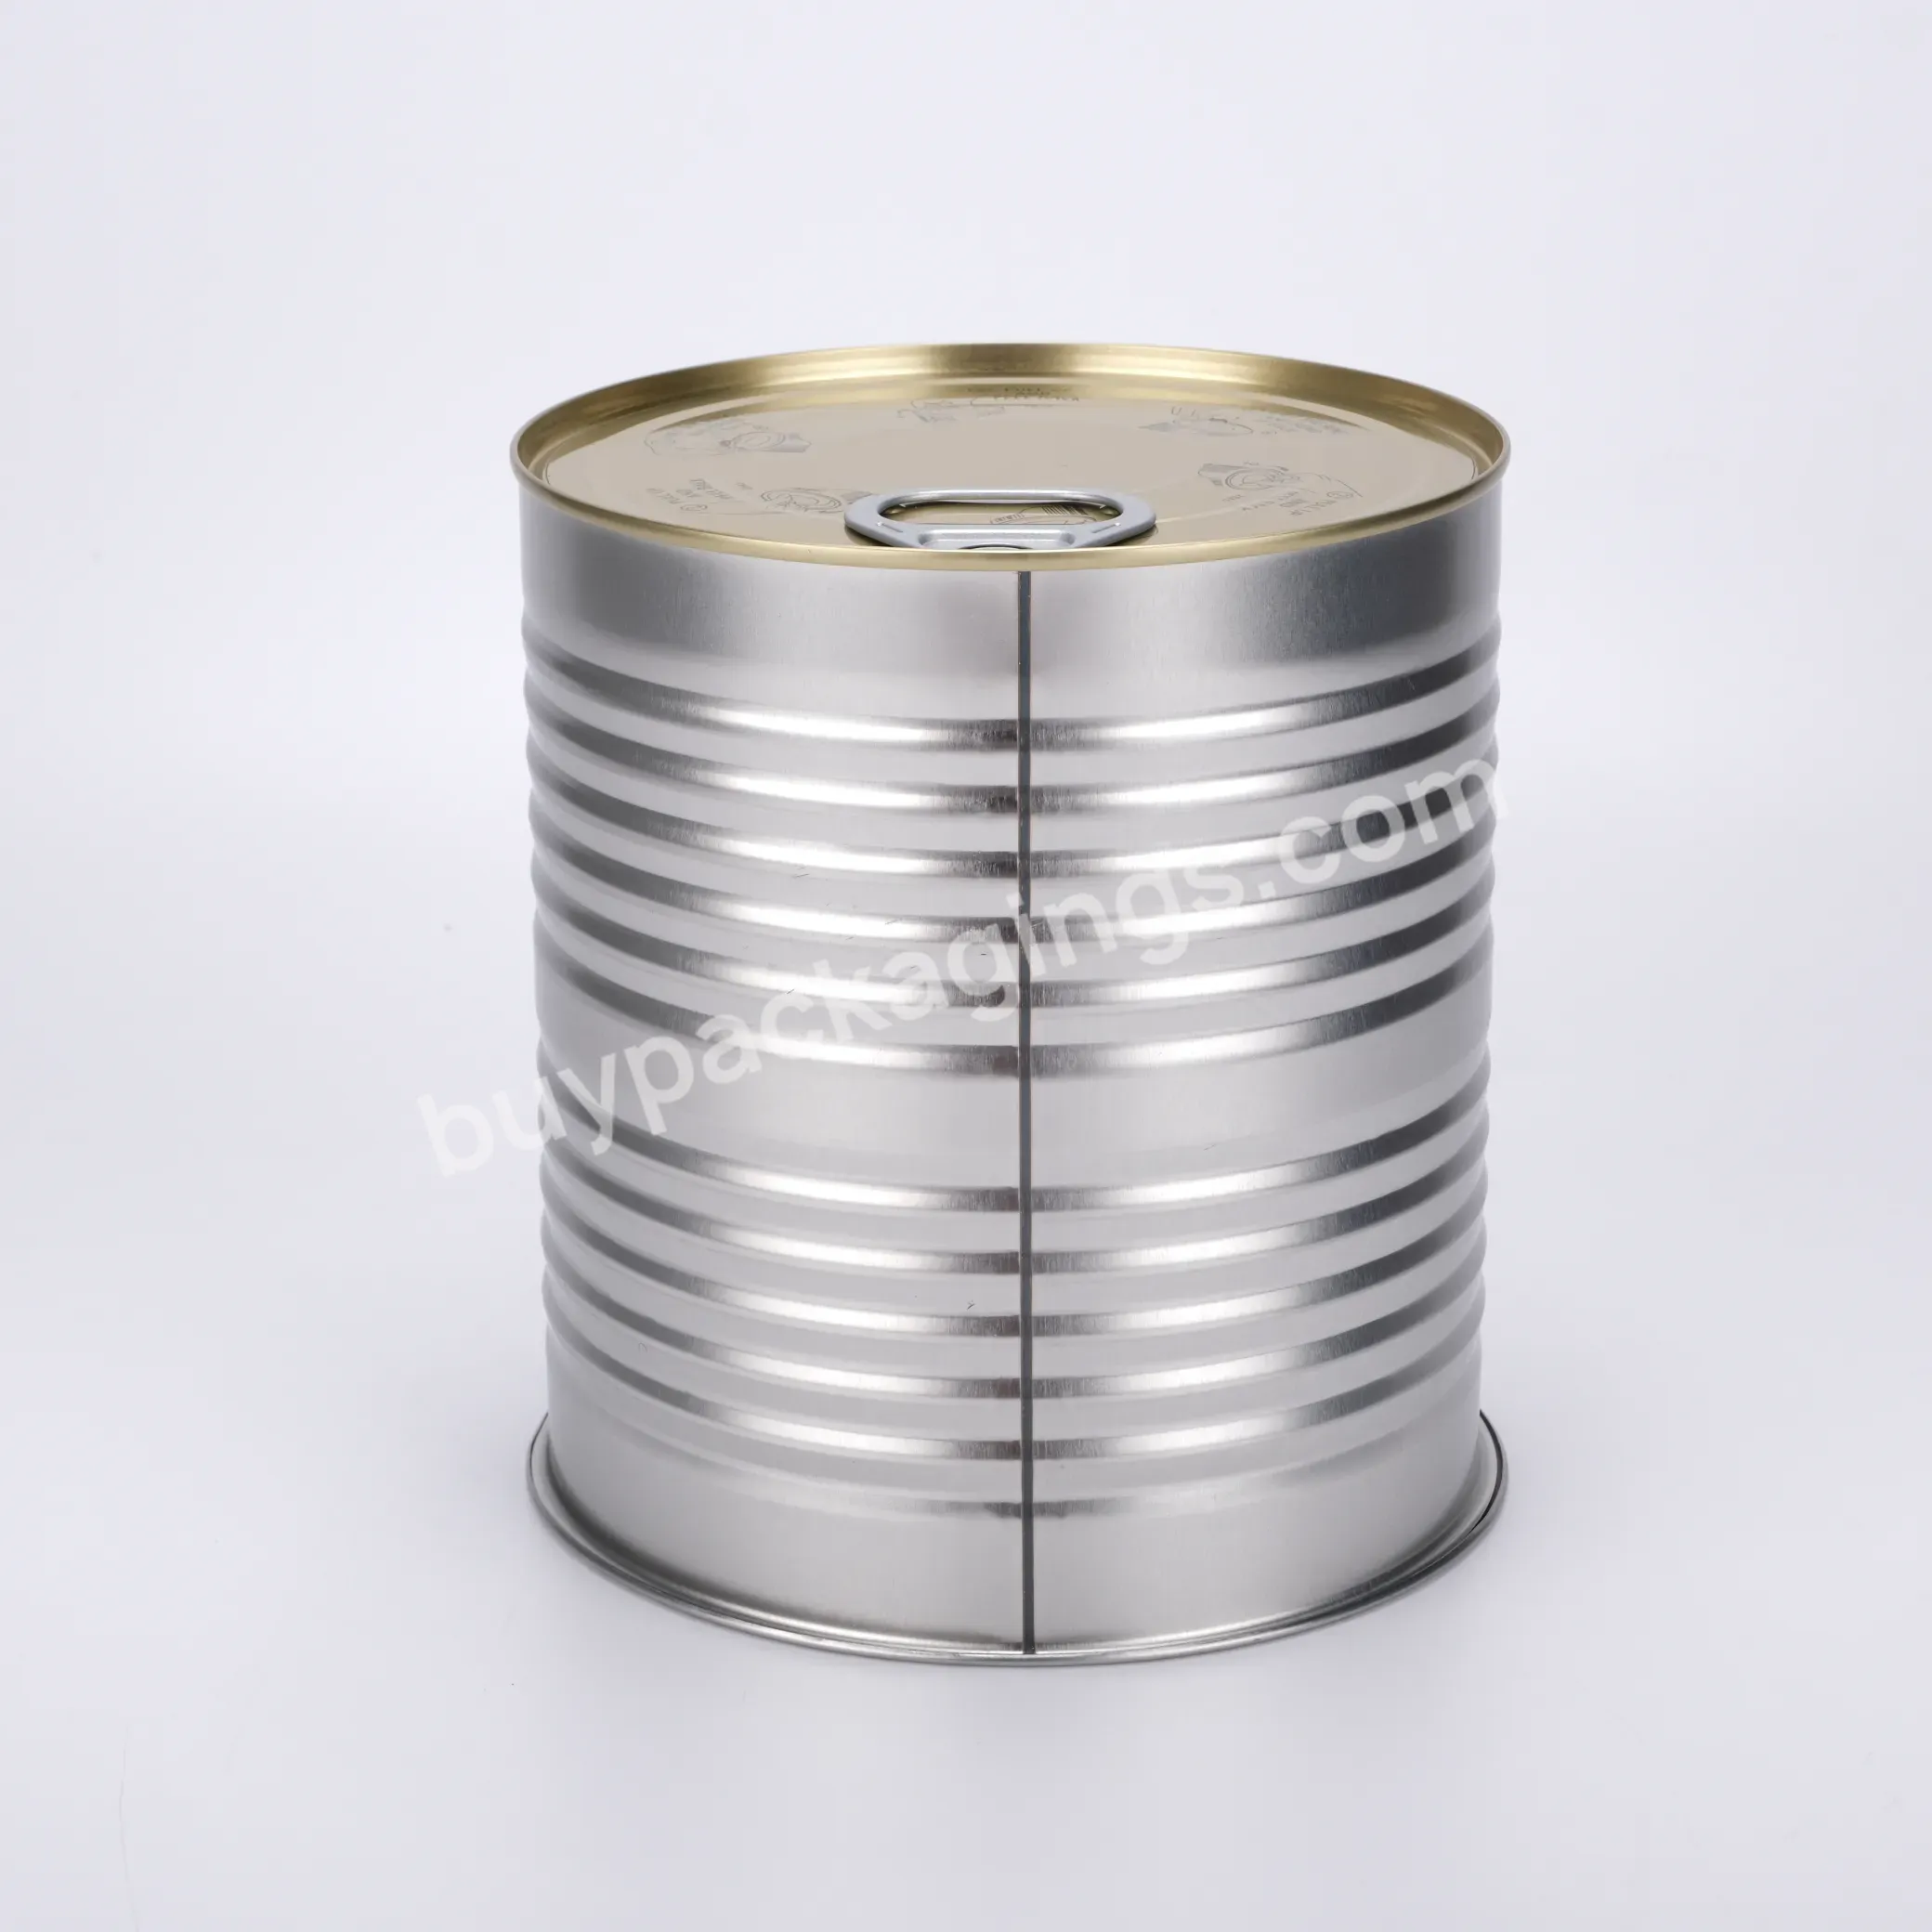 Affordable Very Practical Boutique Fashion Empty Metal Aluminum Food Tin Cans